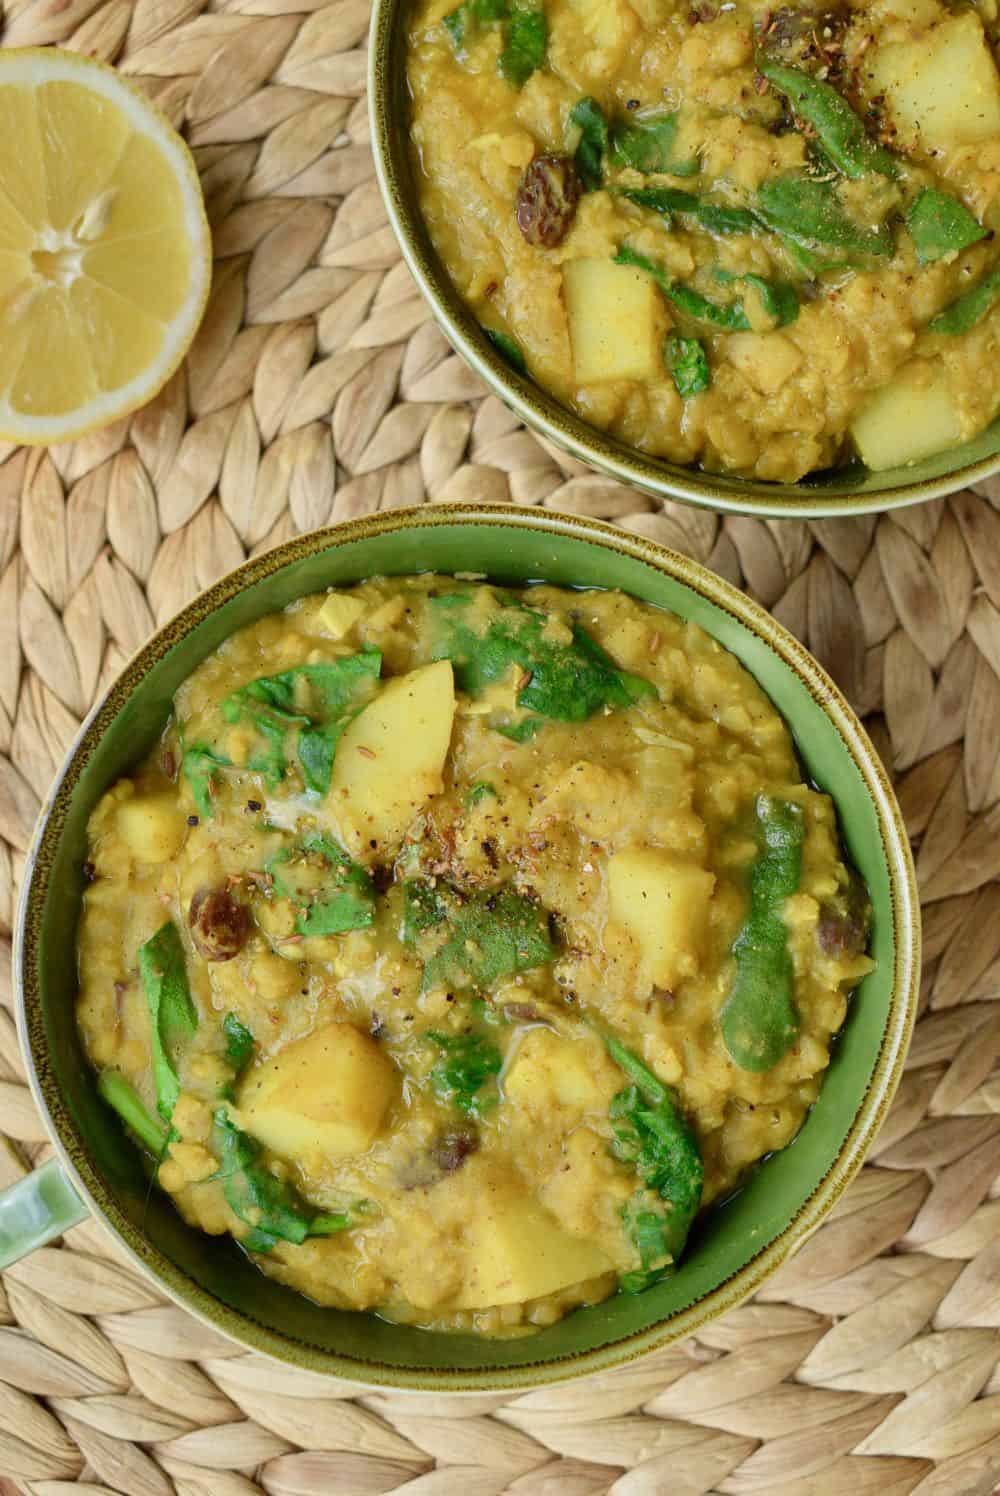 The fresh green colour of spinach stands out against the golden yellow lentil dahl